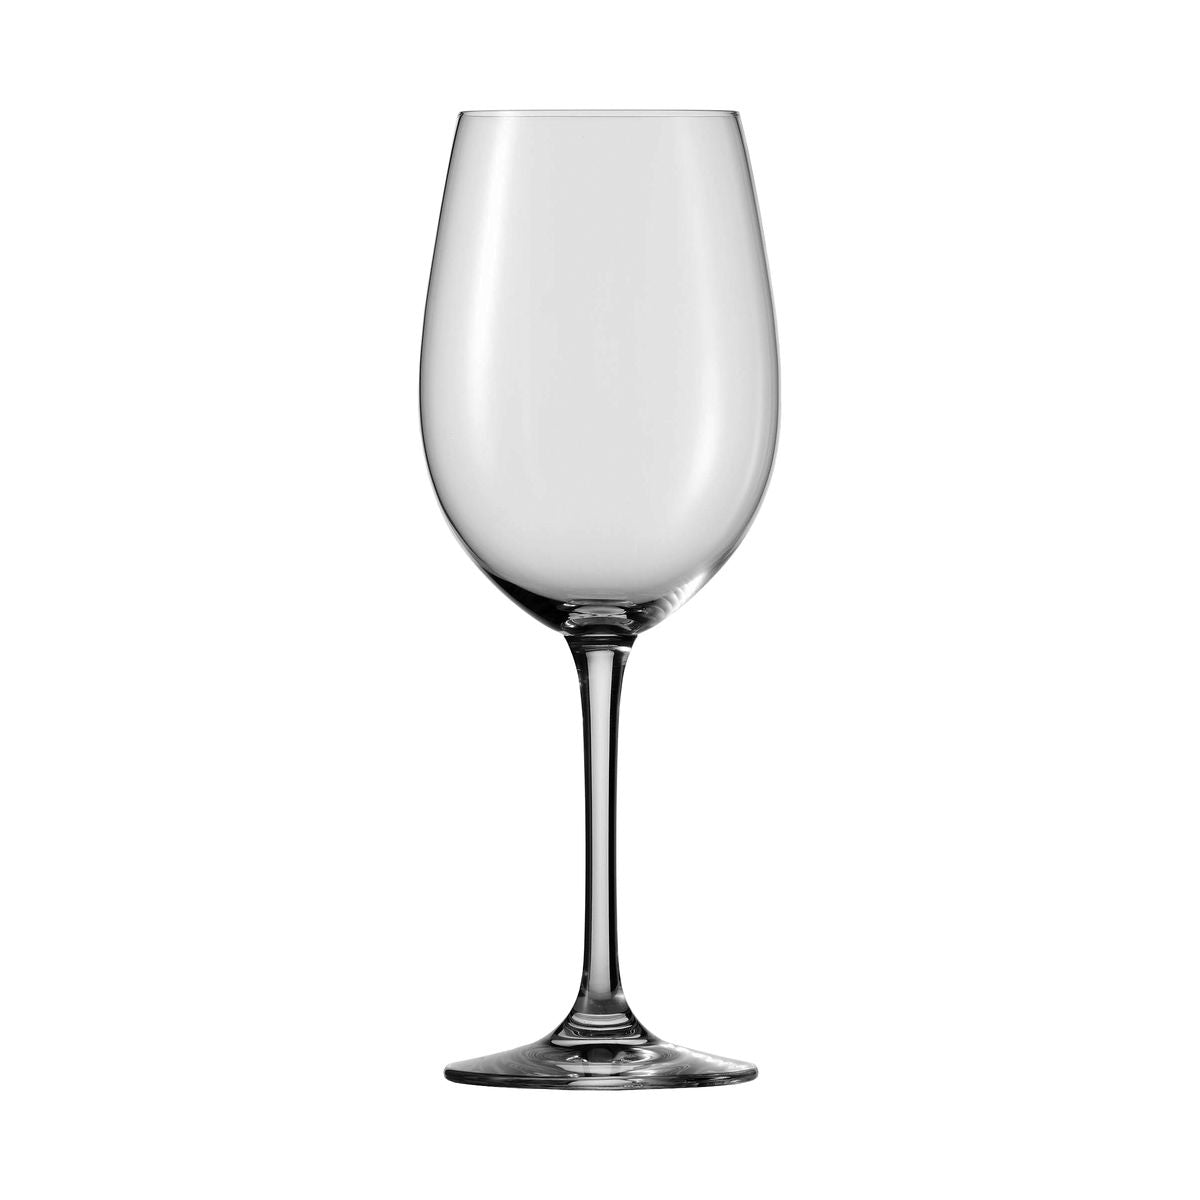 Bordeaux/Claret Goblet - 645Ml, Classico from Schott Zwiesel. made out of Glass and sold in boxes of 6. Hospitality quality at wholesale price with The Flying Fork! 